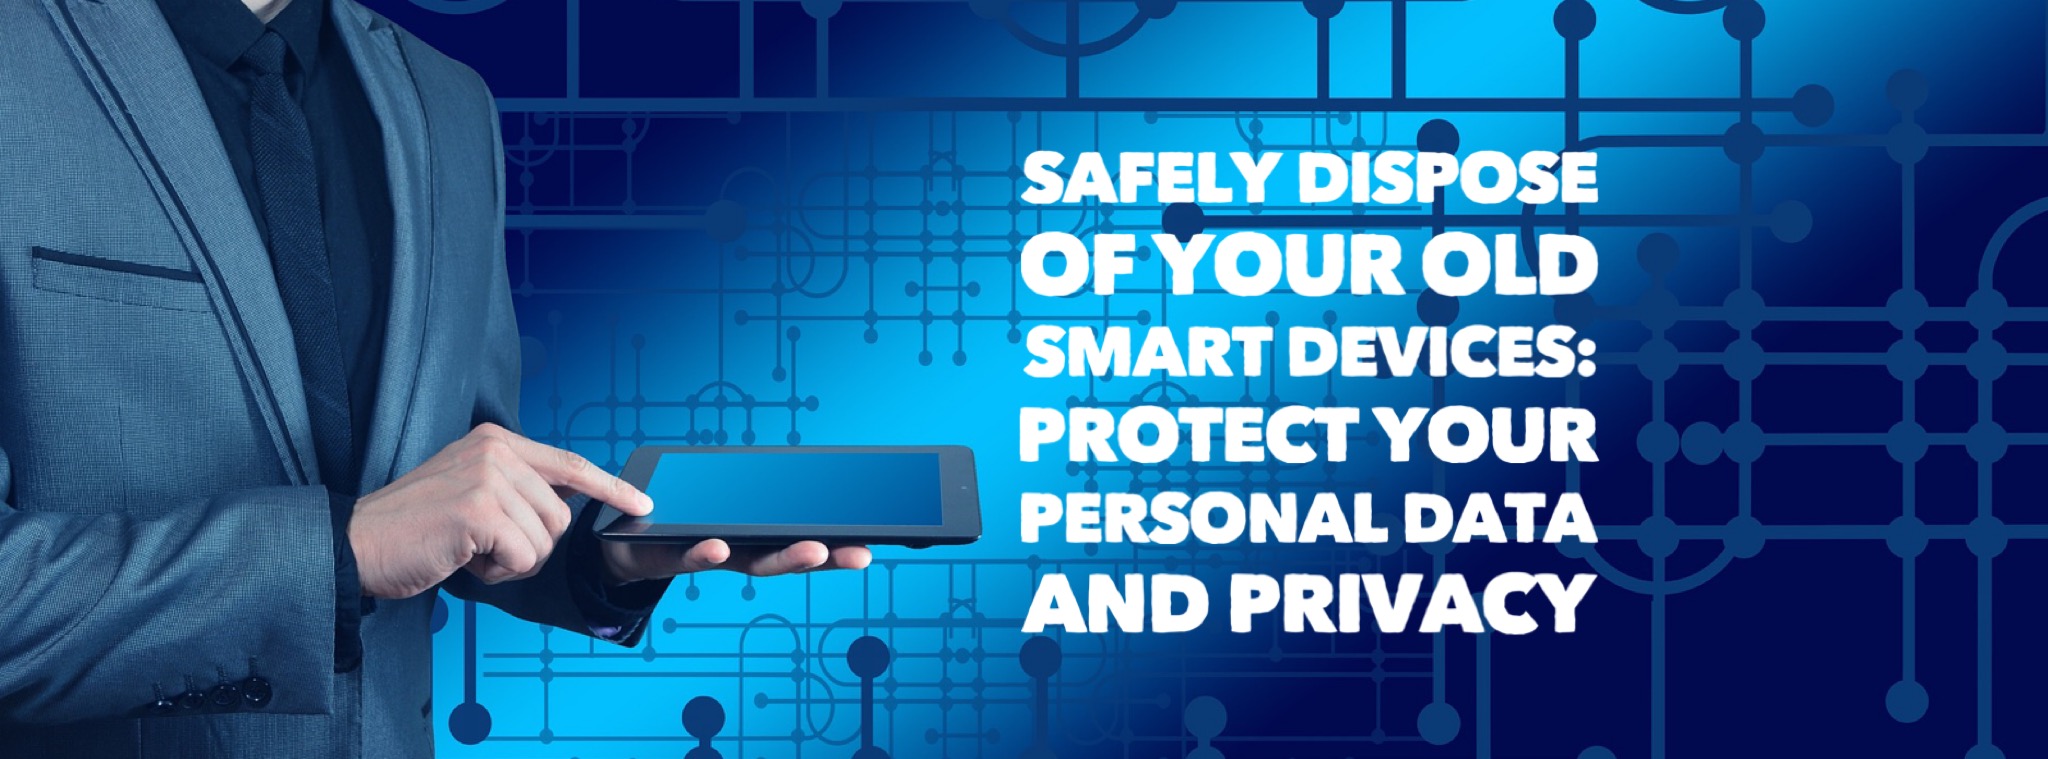 Safely Dispose of Your Old Smart Devices: Protect Your Personal Data and Privacy